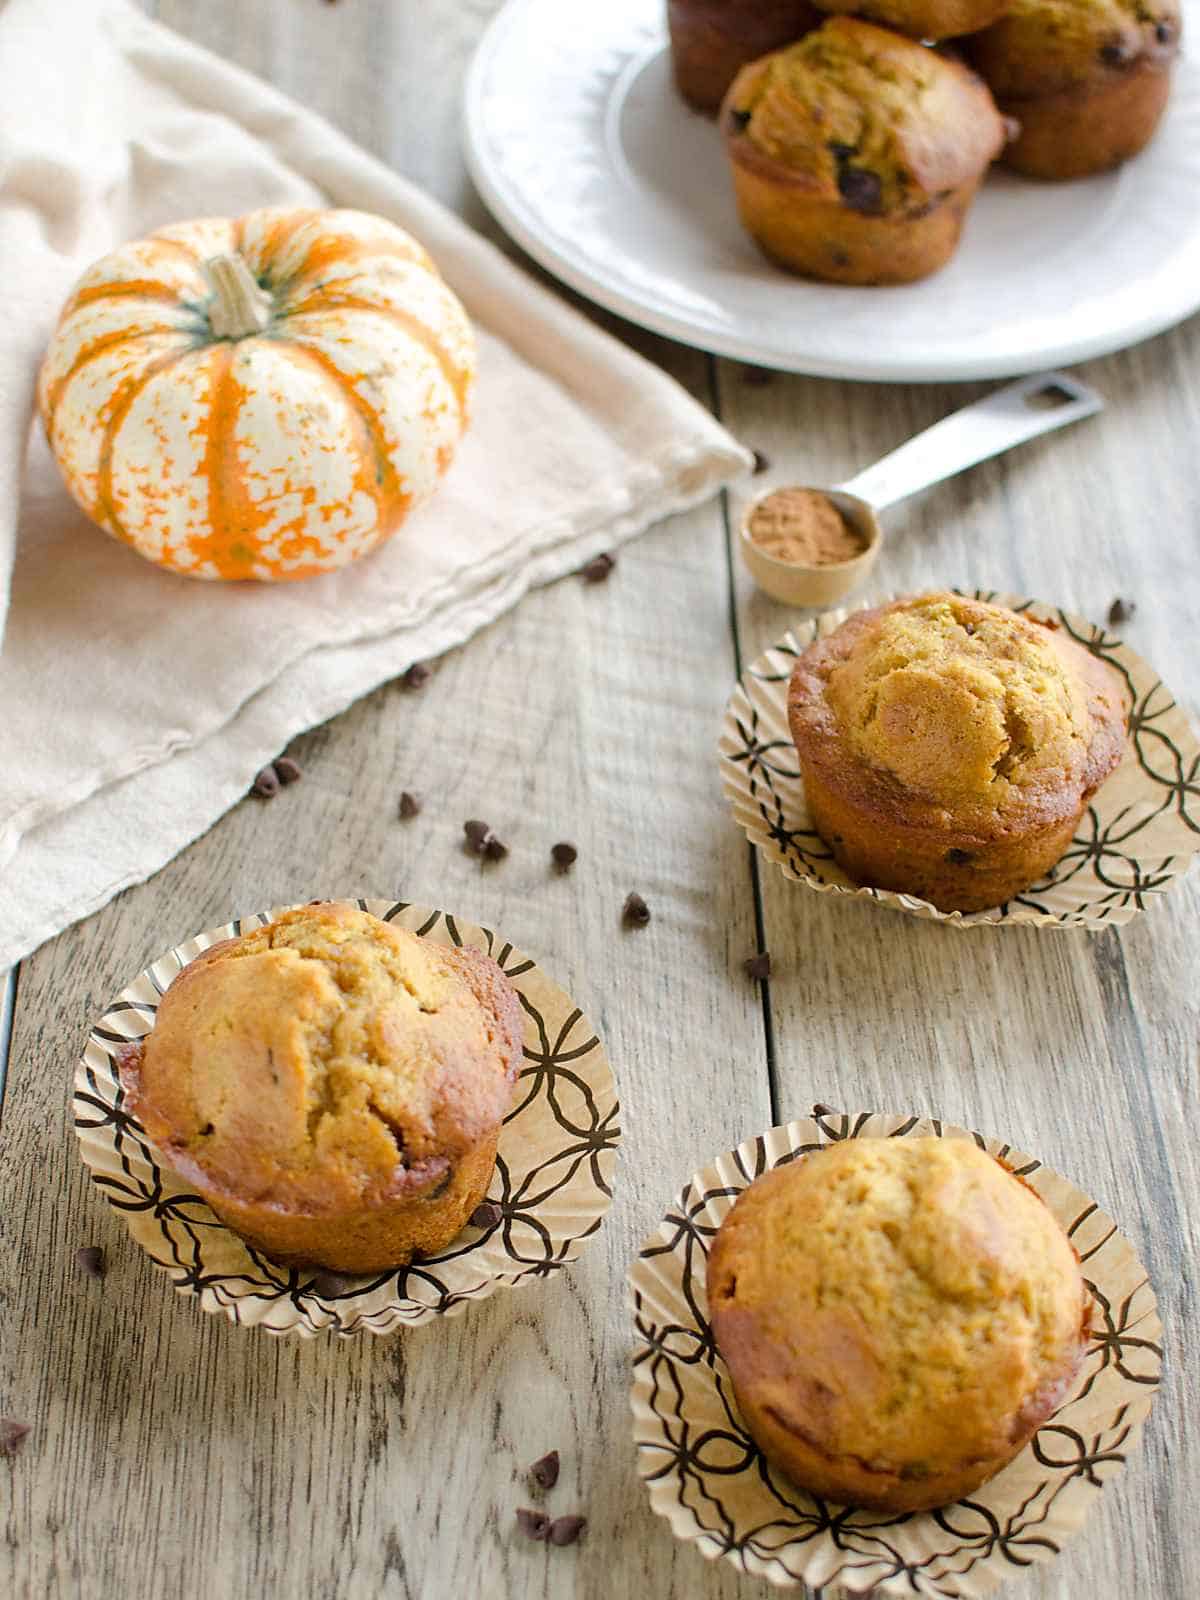 Need an easy pumpkin recipe? These are the best pumpkin muffins ever!! The addition of chocolate chips is the perfect combo! Healthy options included. #artfrommytable #pumpkin #muffins #pumpkinrecipe #fallfood #lightermuffins #pumpkinmuffins #healthypumpkinmuffins #pumpkinchocolatechip #fallrecipe via @artfrommytable